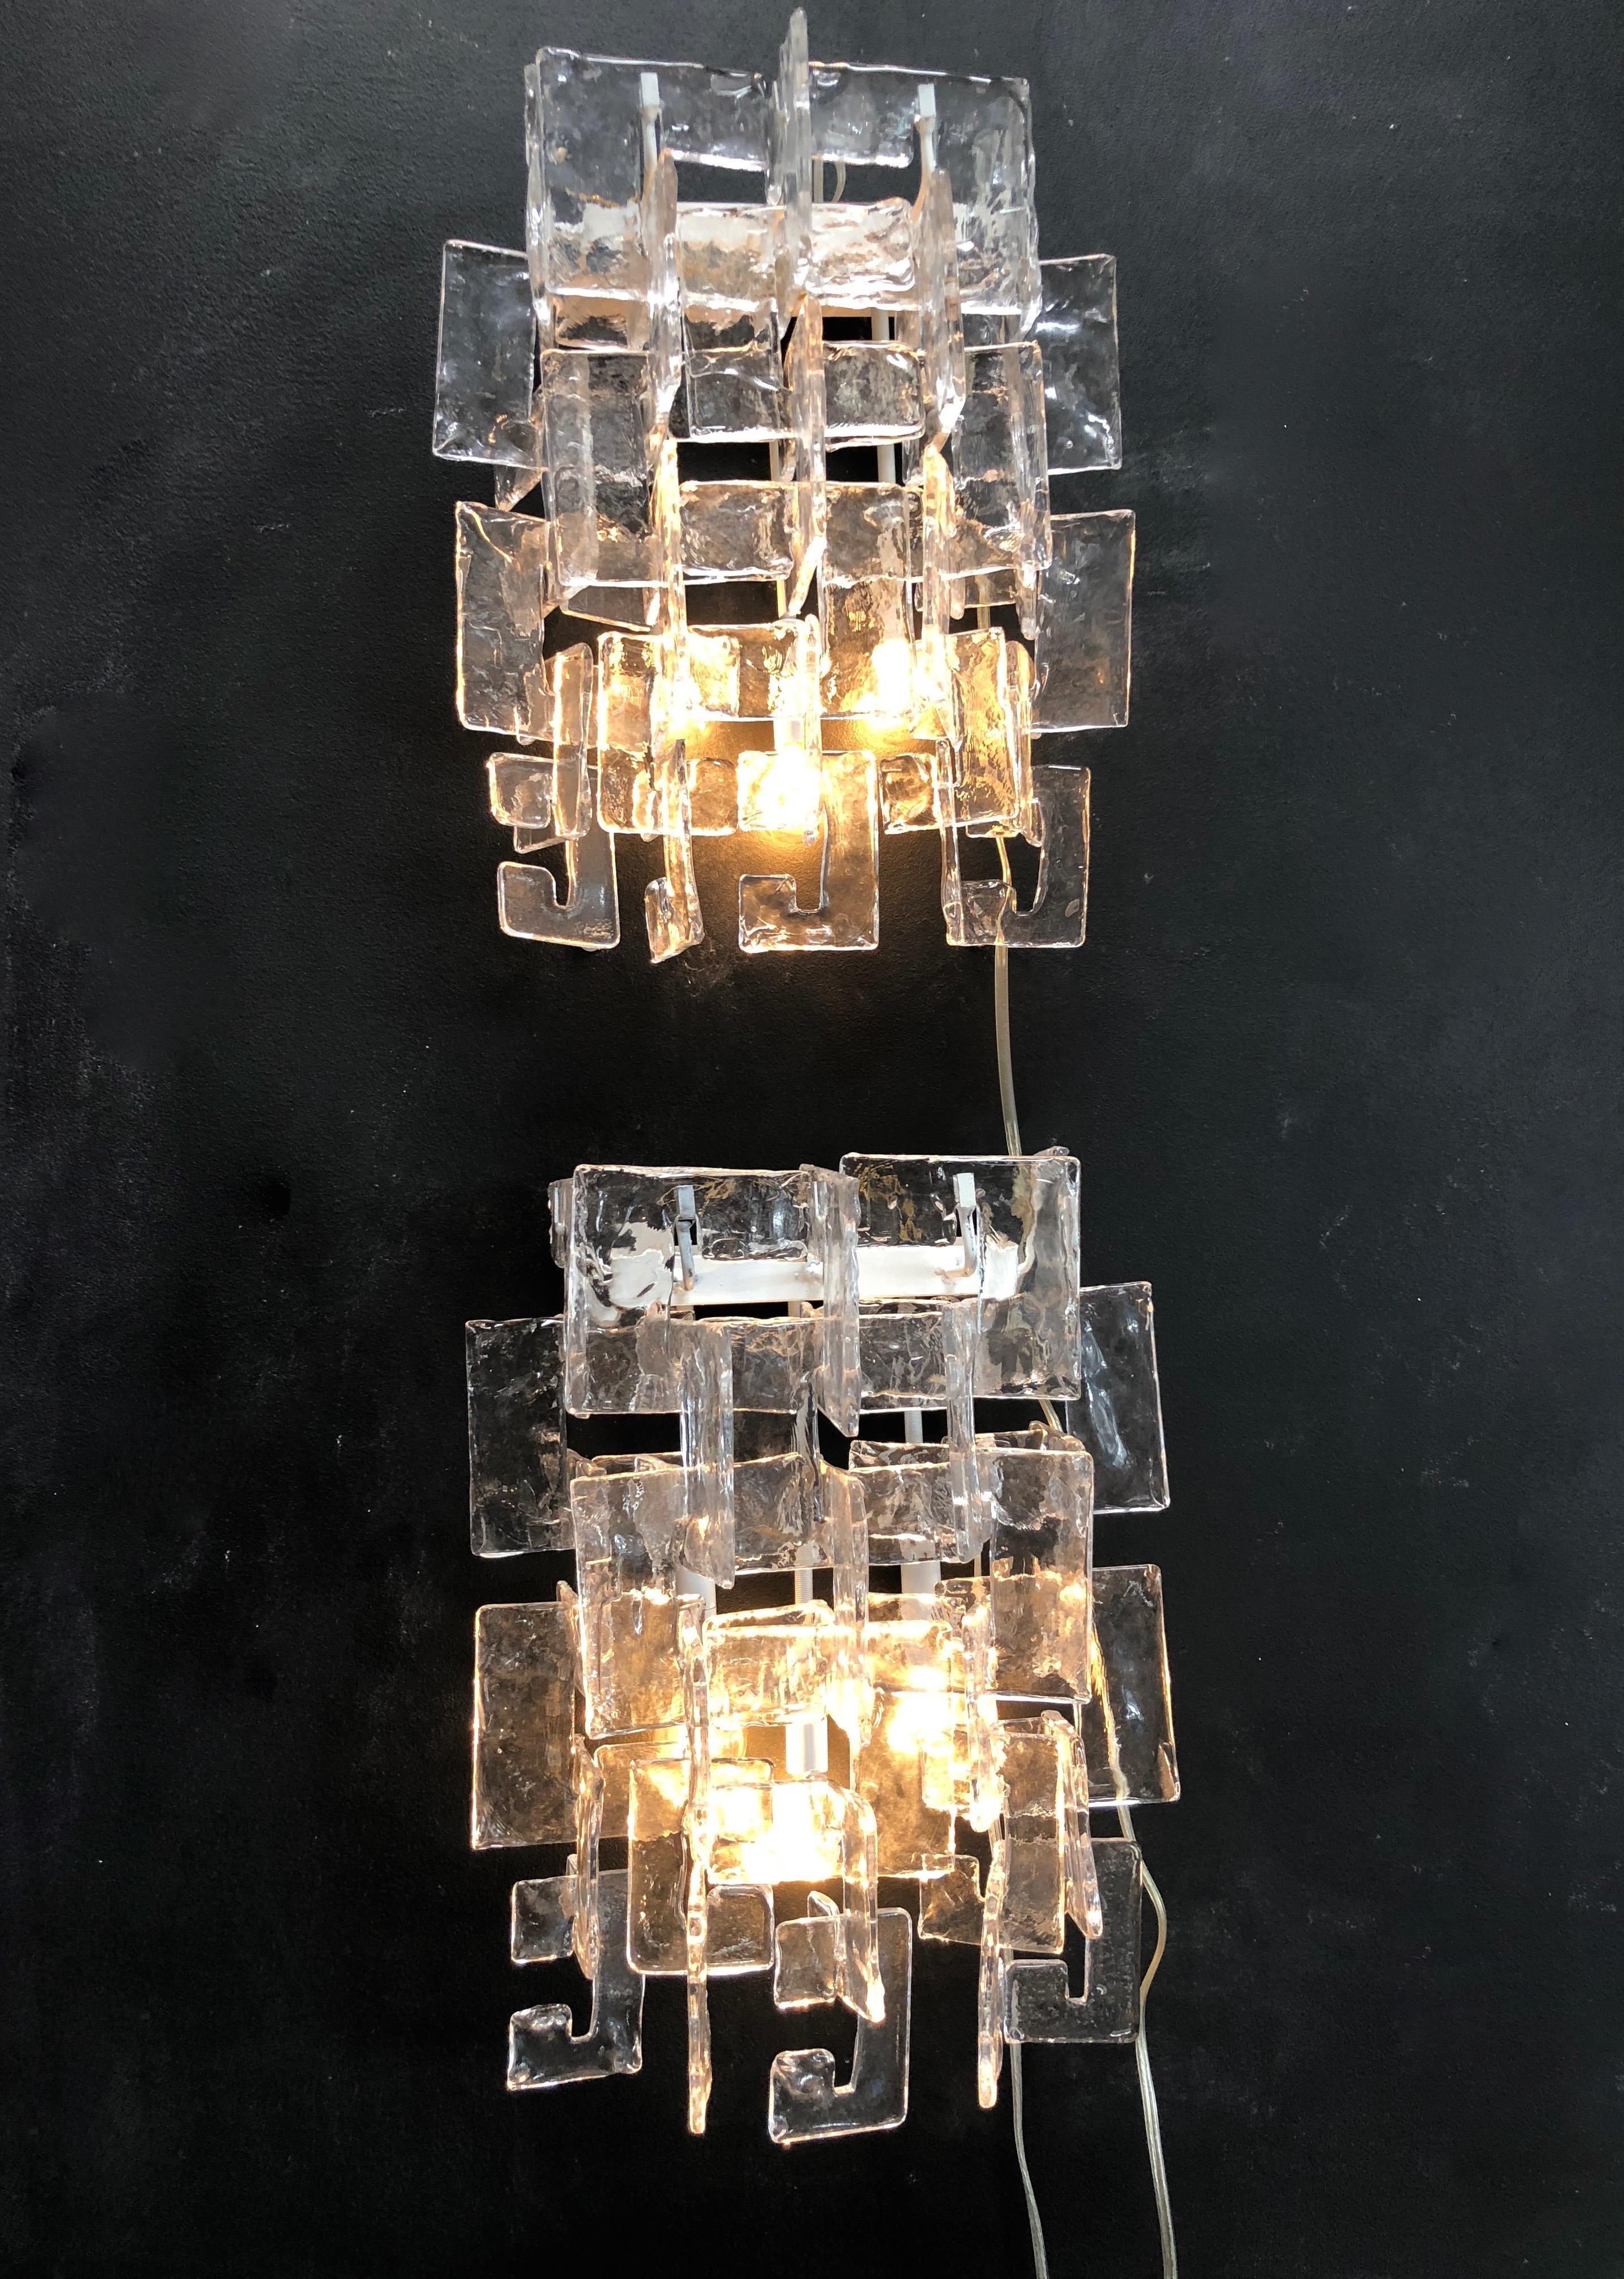 Pair of rare big C Cascade sconces by the designer Carlo Nason for the manufacture Mazzega.
The great Murano glass quality, 30 amber and 44 white ice glass.
Really important by the glass size and long for a pair of this style.